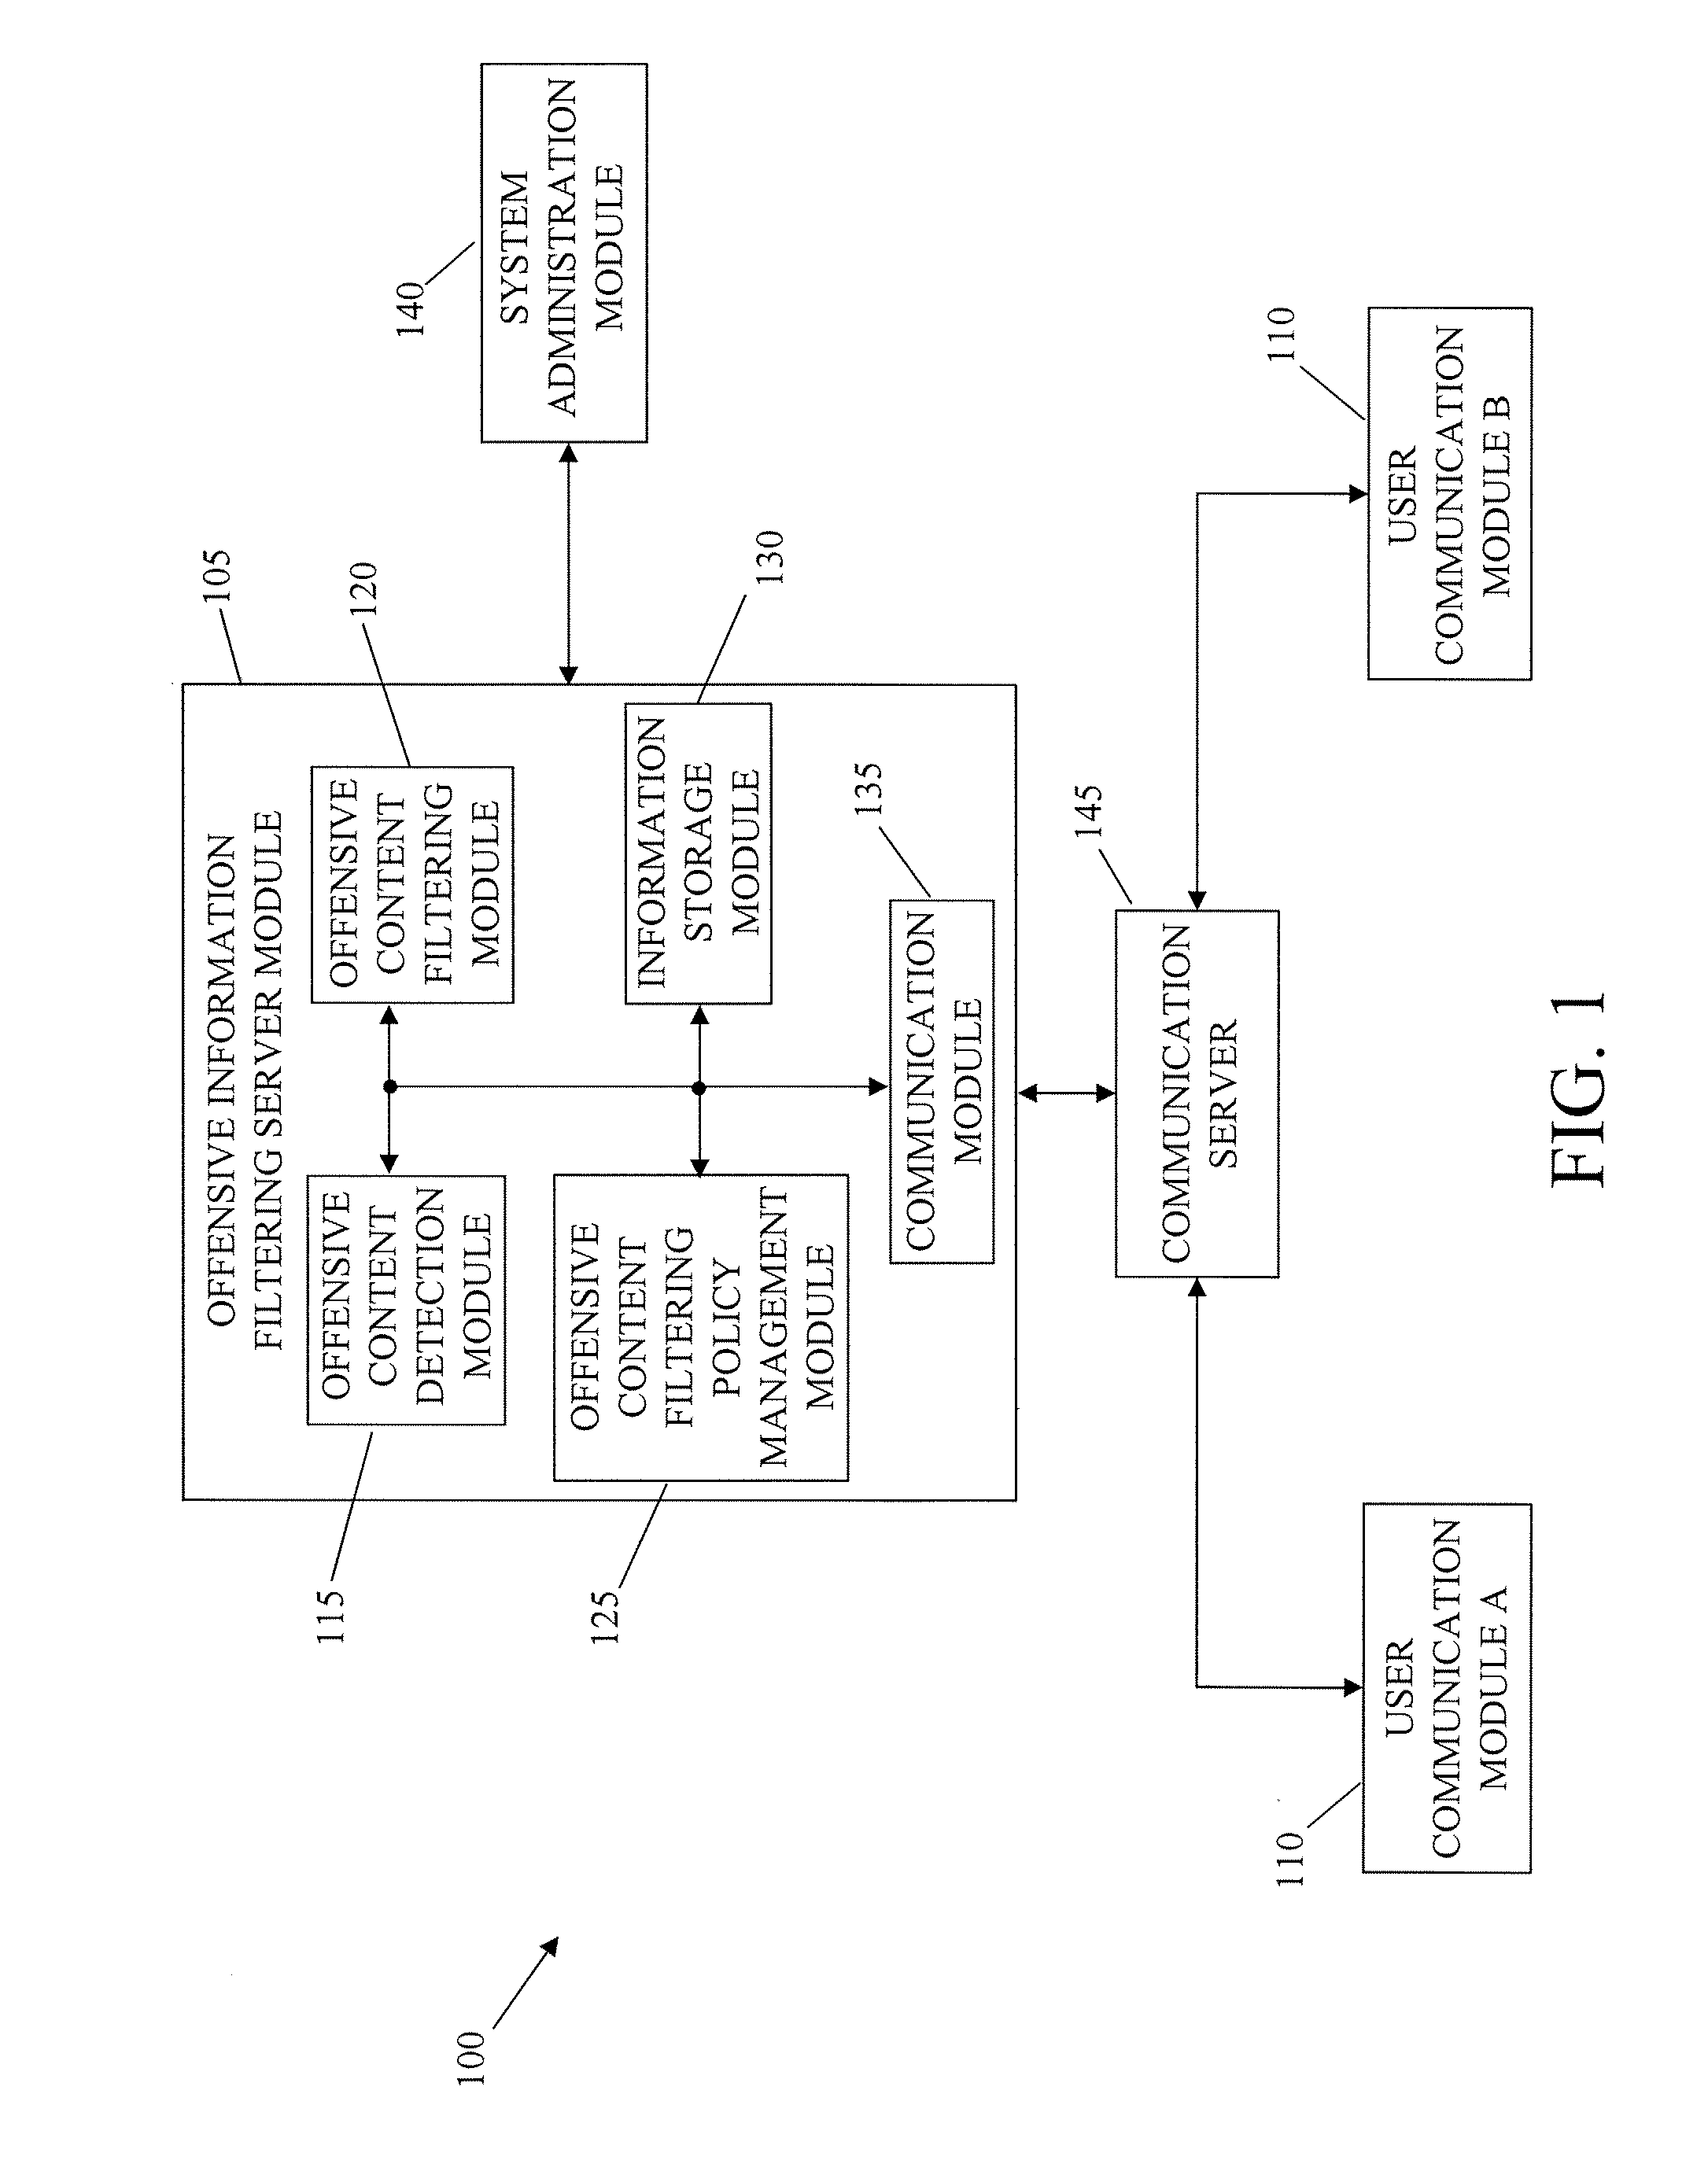 System and method for filtering offensive information content in communication systems